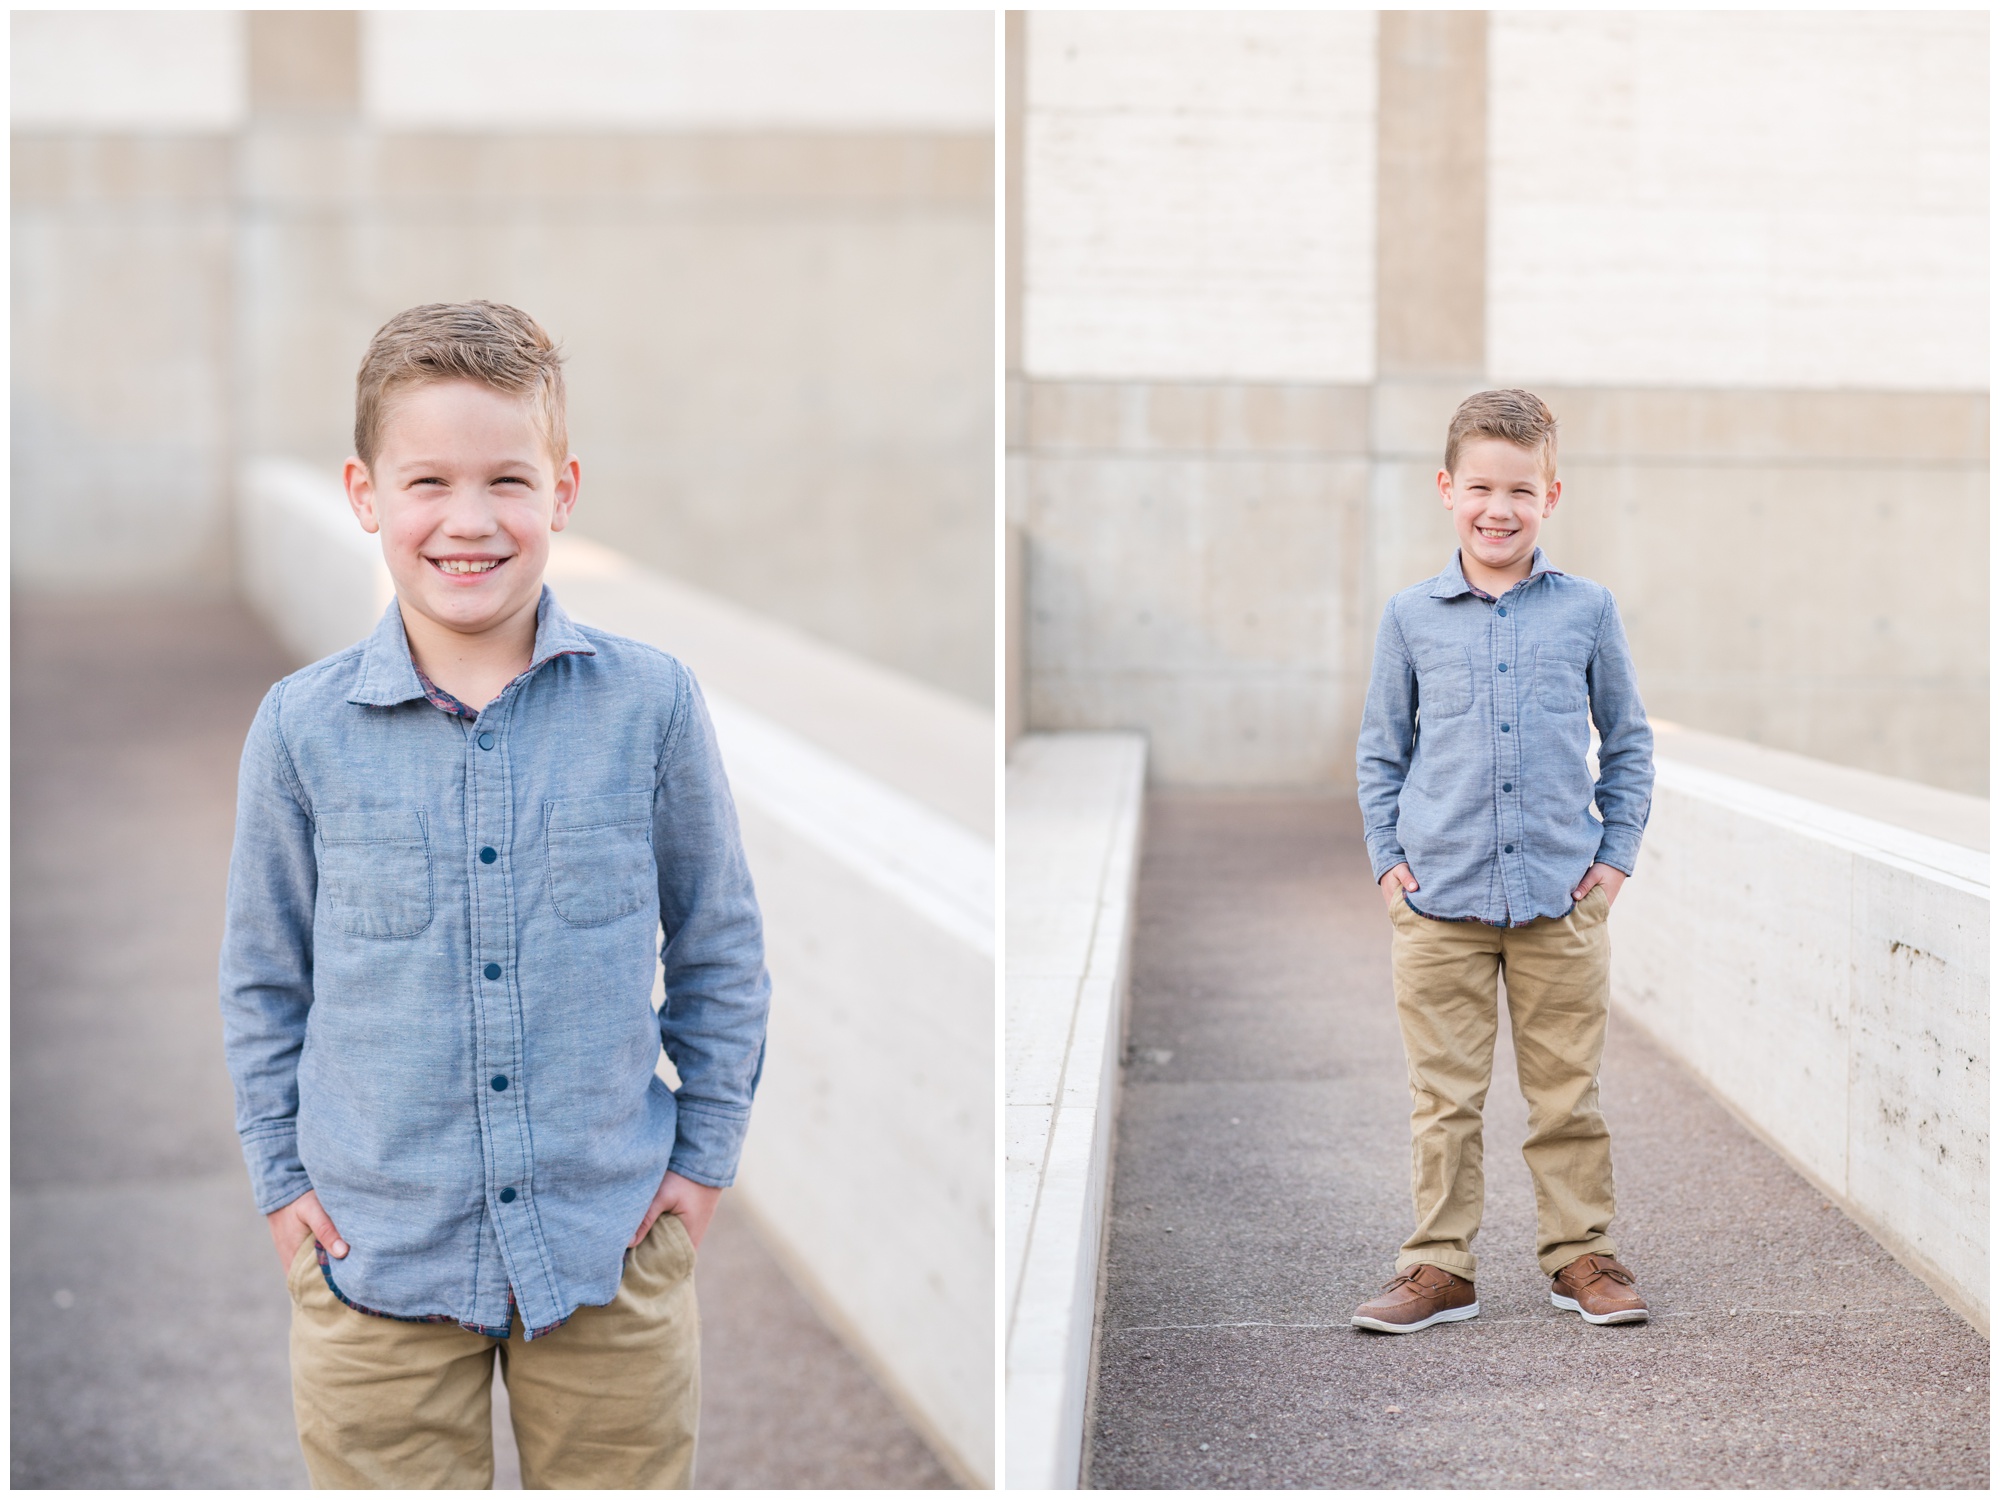 Fort Worth Kimbell Art Museum | Fort Worth Family Session | Fort Worth Family Photographer | Lauren Grimes Photography